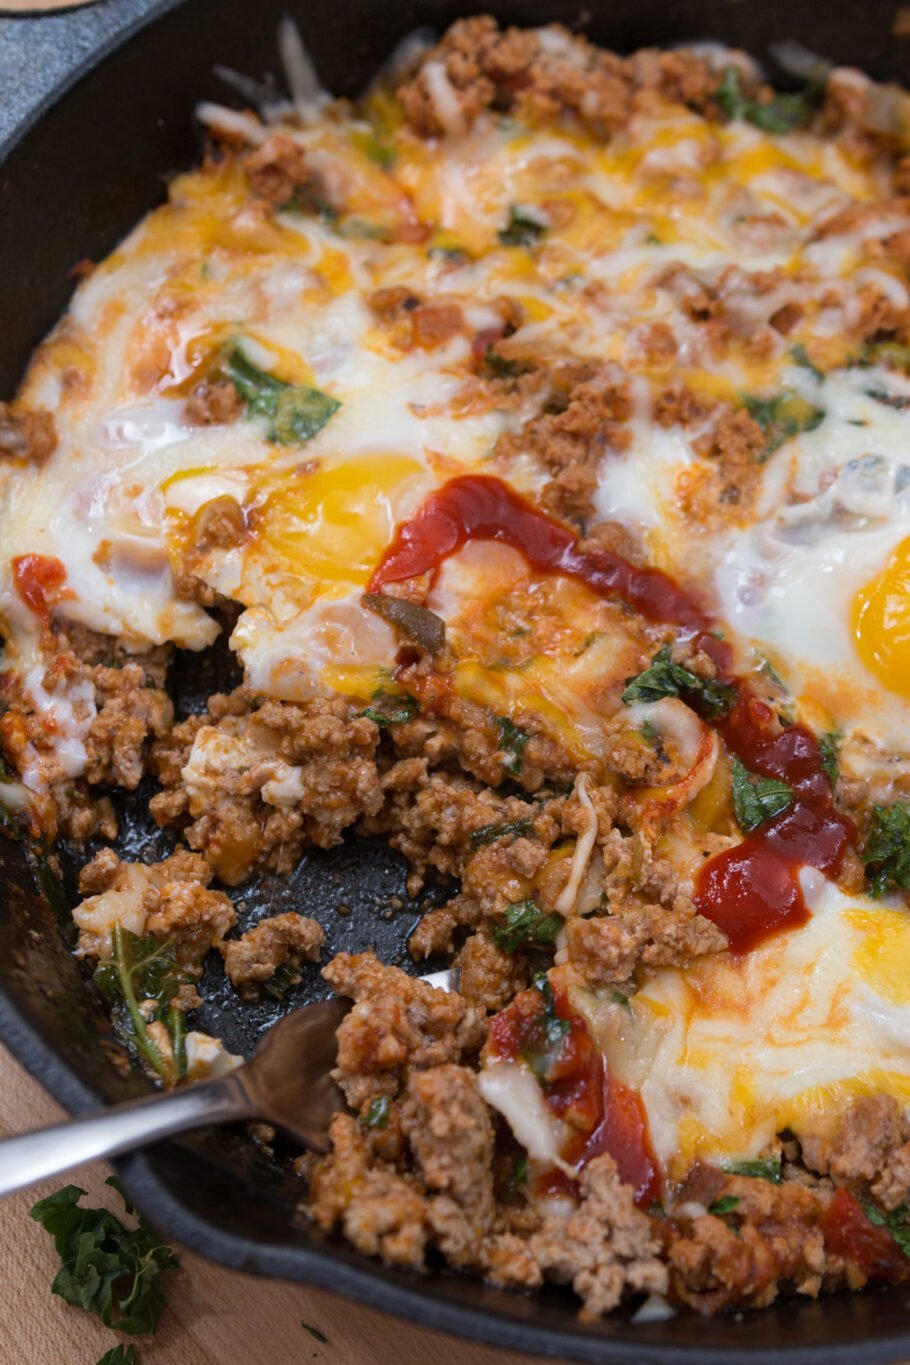 Low Carb Breakfast Skillet Recipe - The Protein Chef